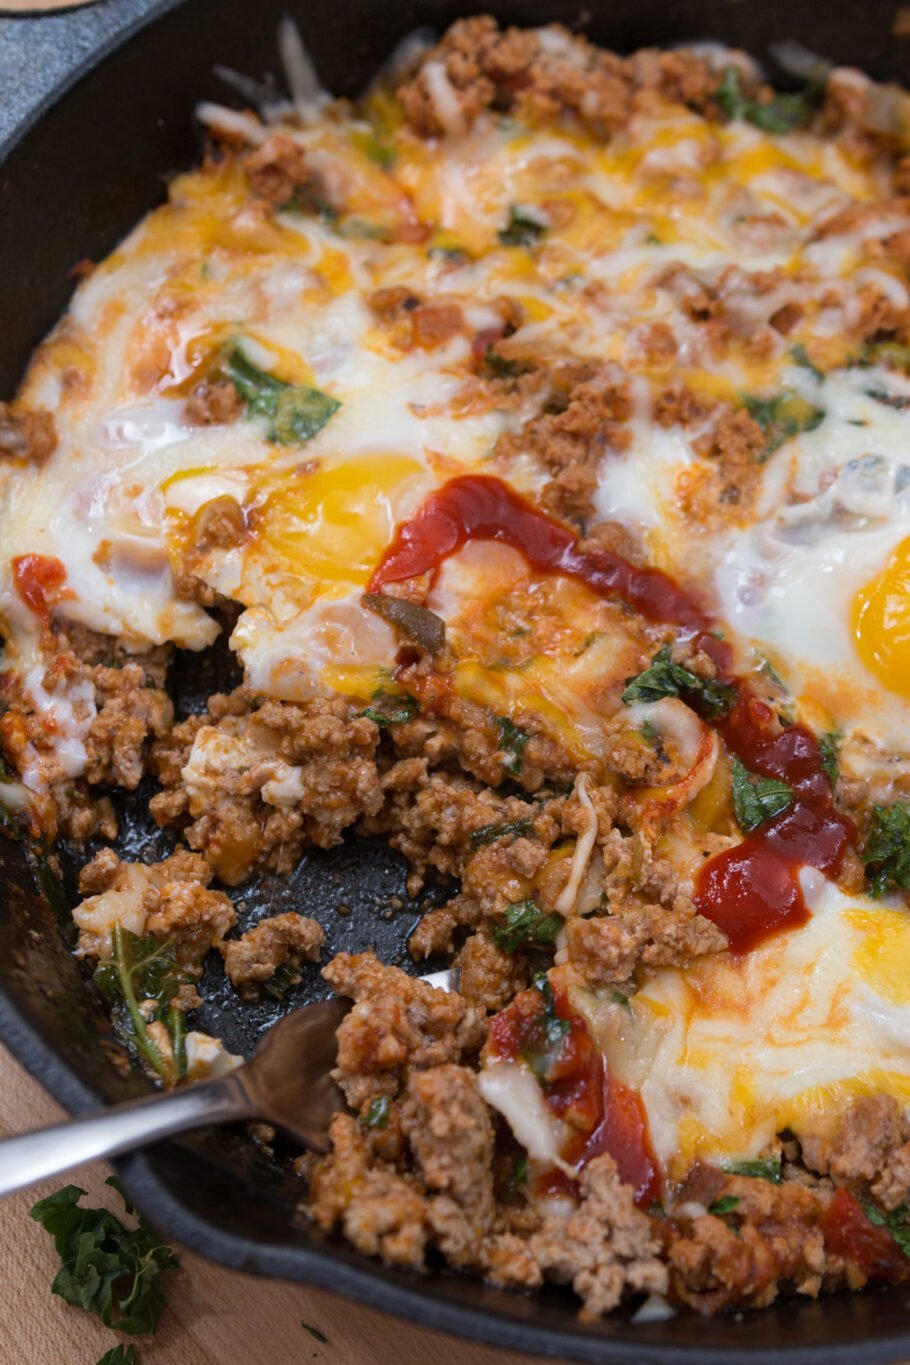 Low Carb Breakfast Skillet Recipe - The Protein Chef